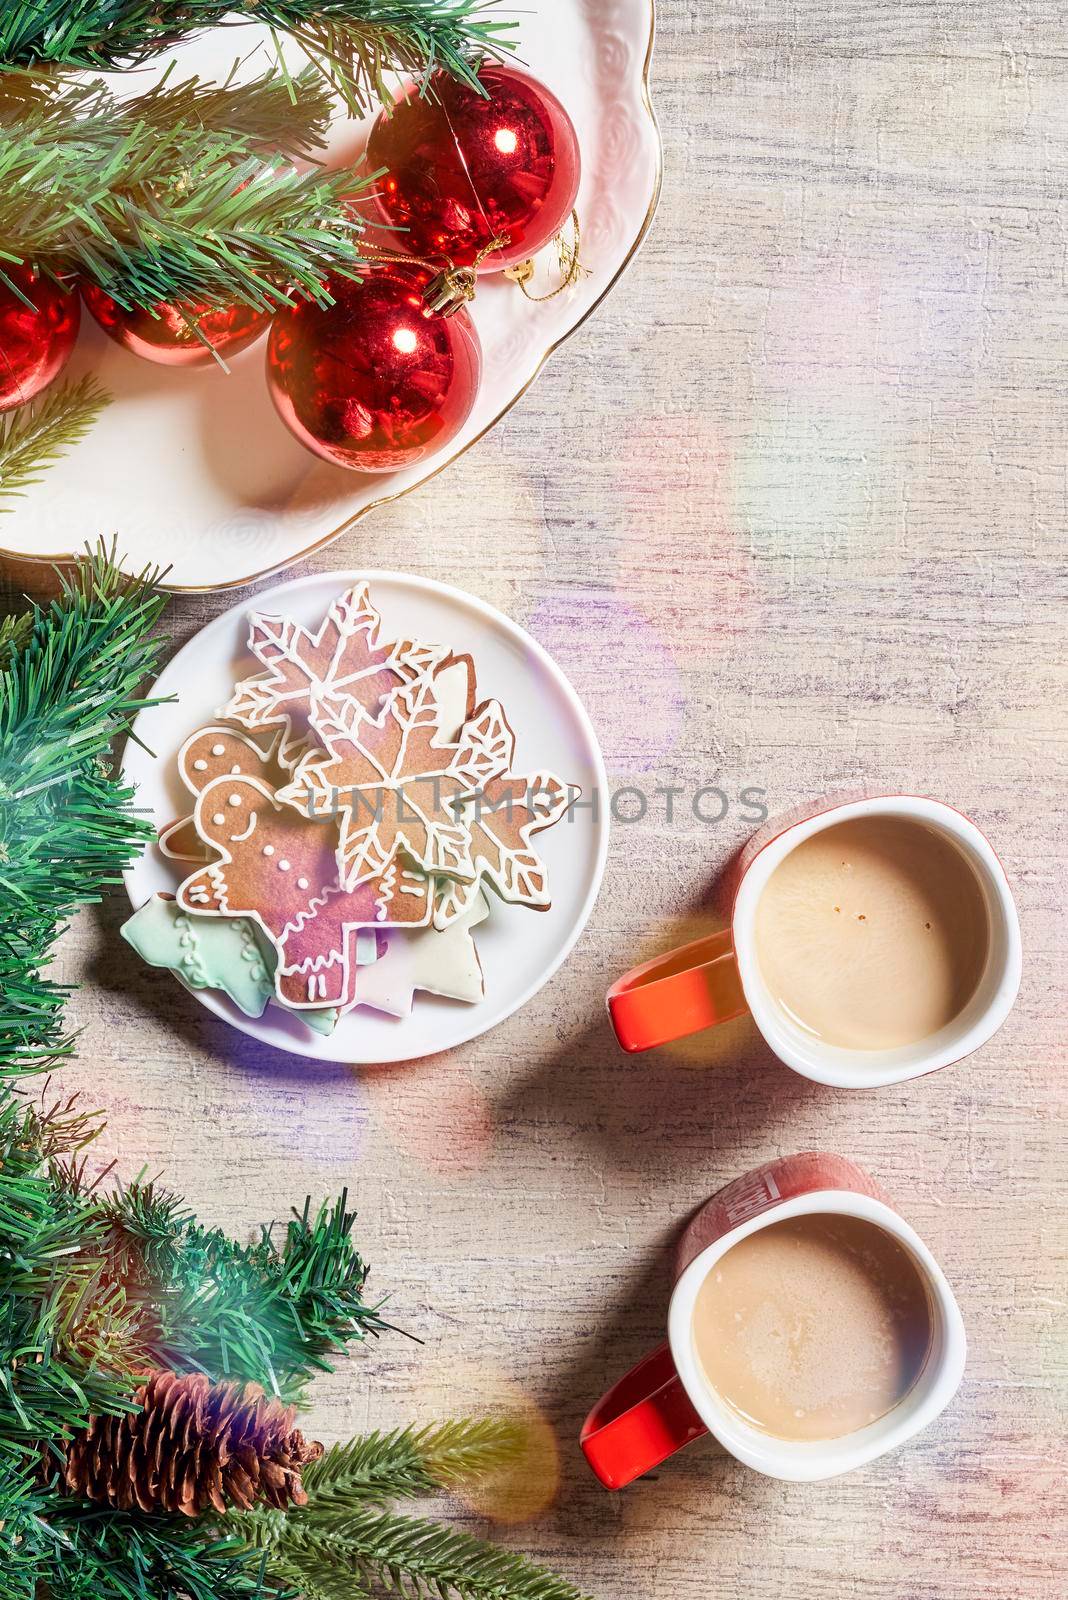 Merry Christmas background with Xmas decors and cookies. Tasty Christmas cookies and X-mas tree baubles. Celebrating Christmas and New year